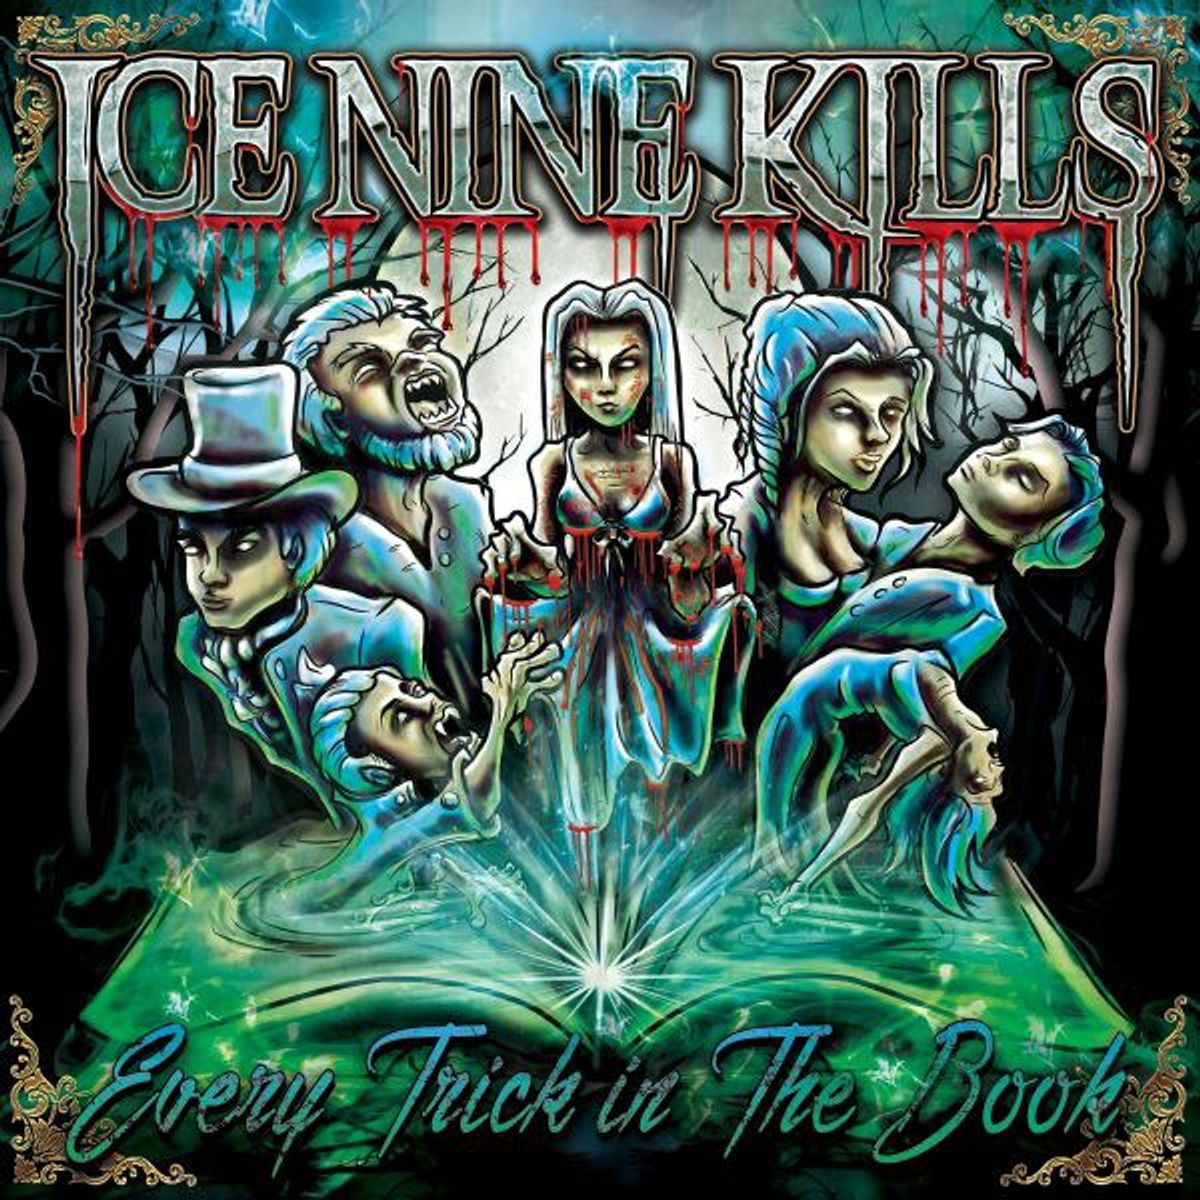 Ice Nine Kills' Album "Every Trick in the Book" Compliments The Literature It's Written After